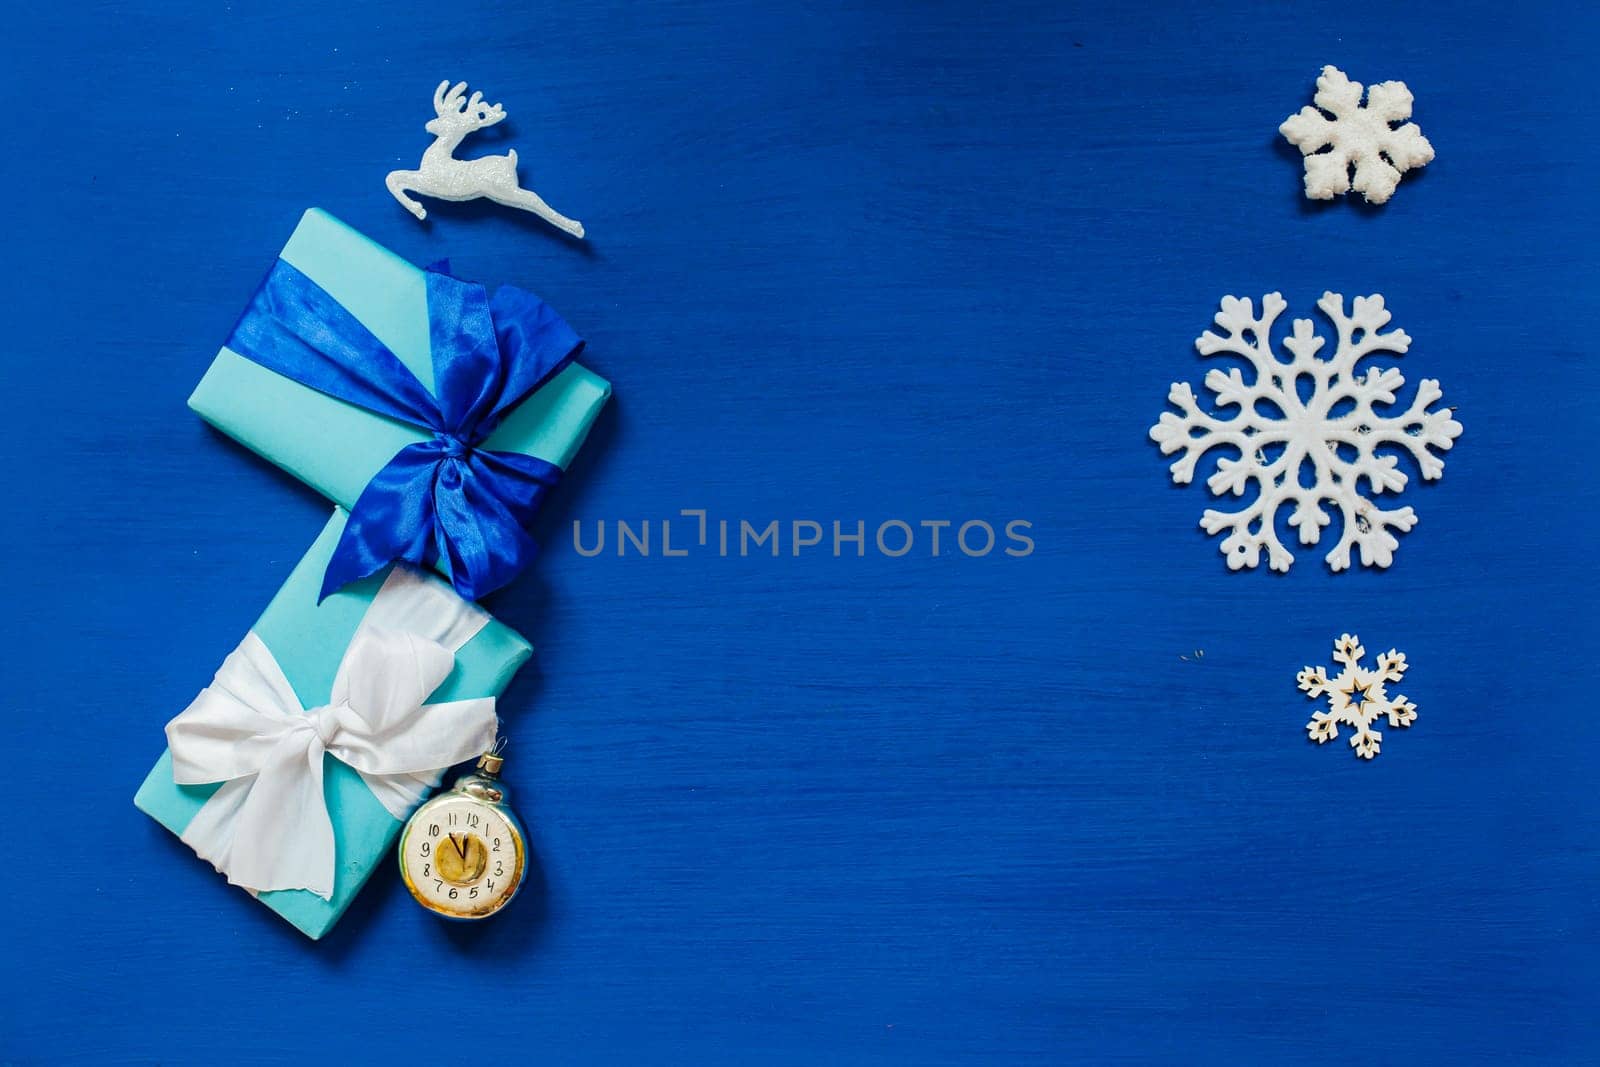 Christmas card gifts decor for the new year against a winter backdrop by Simakov